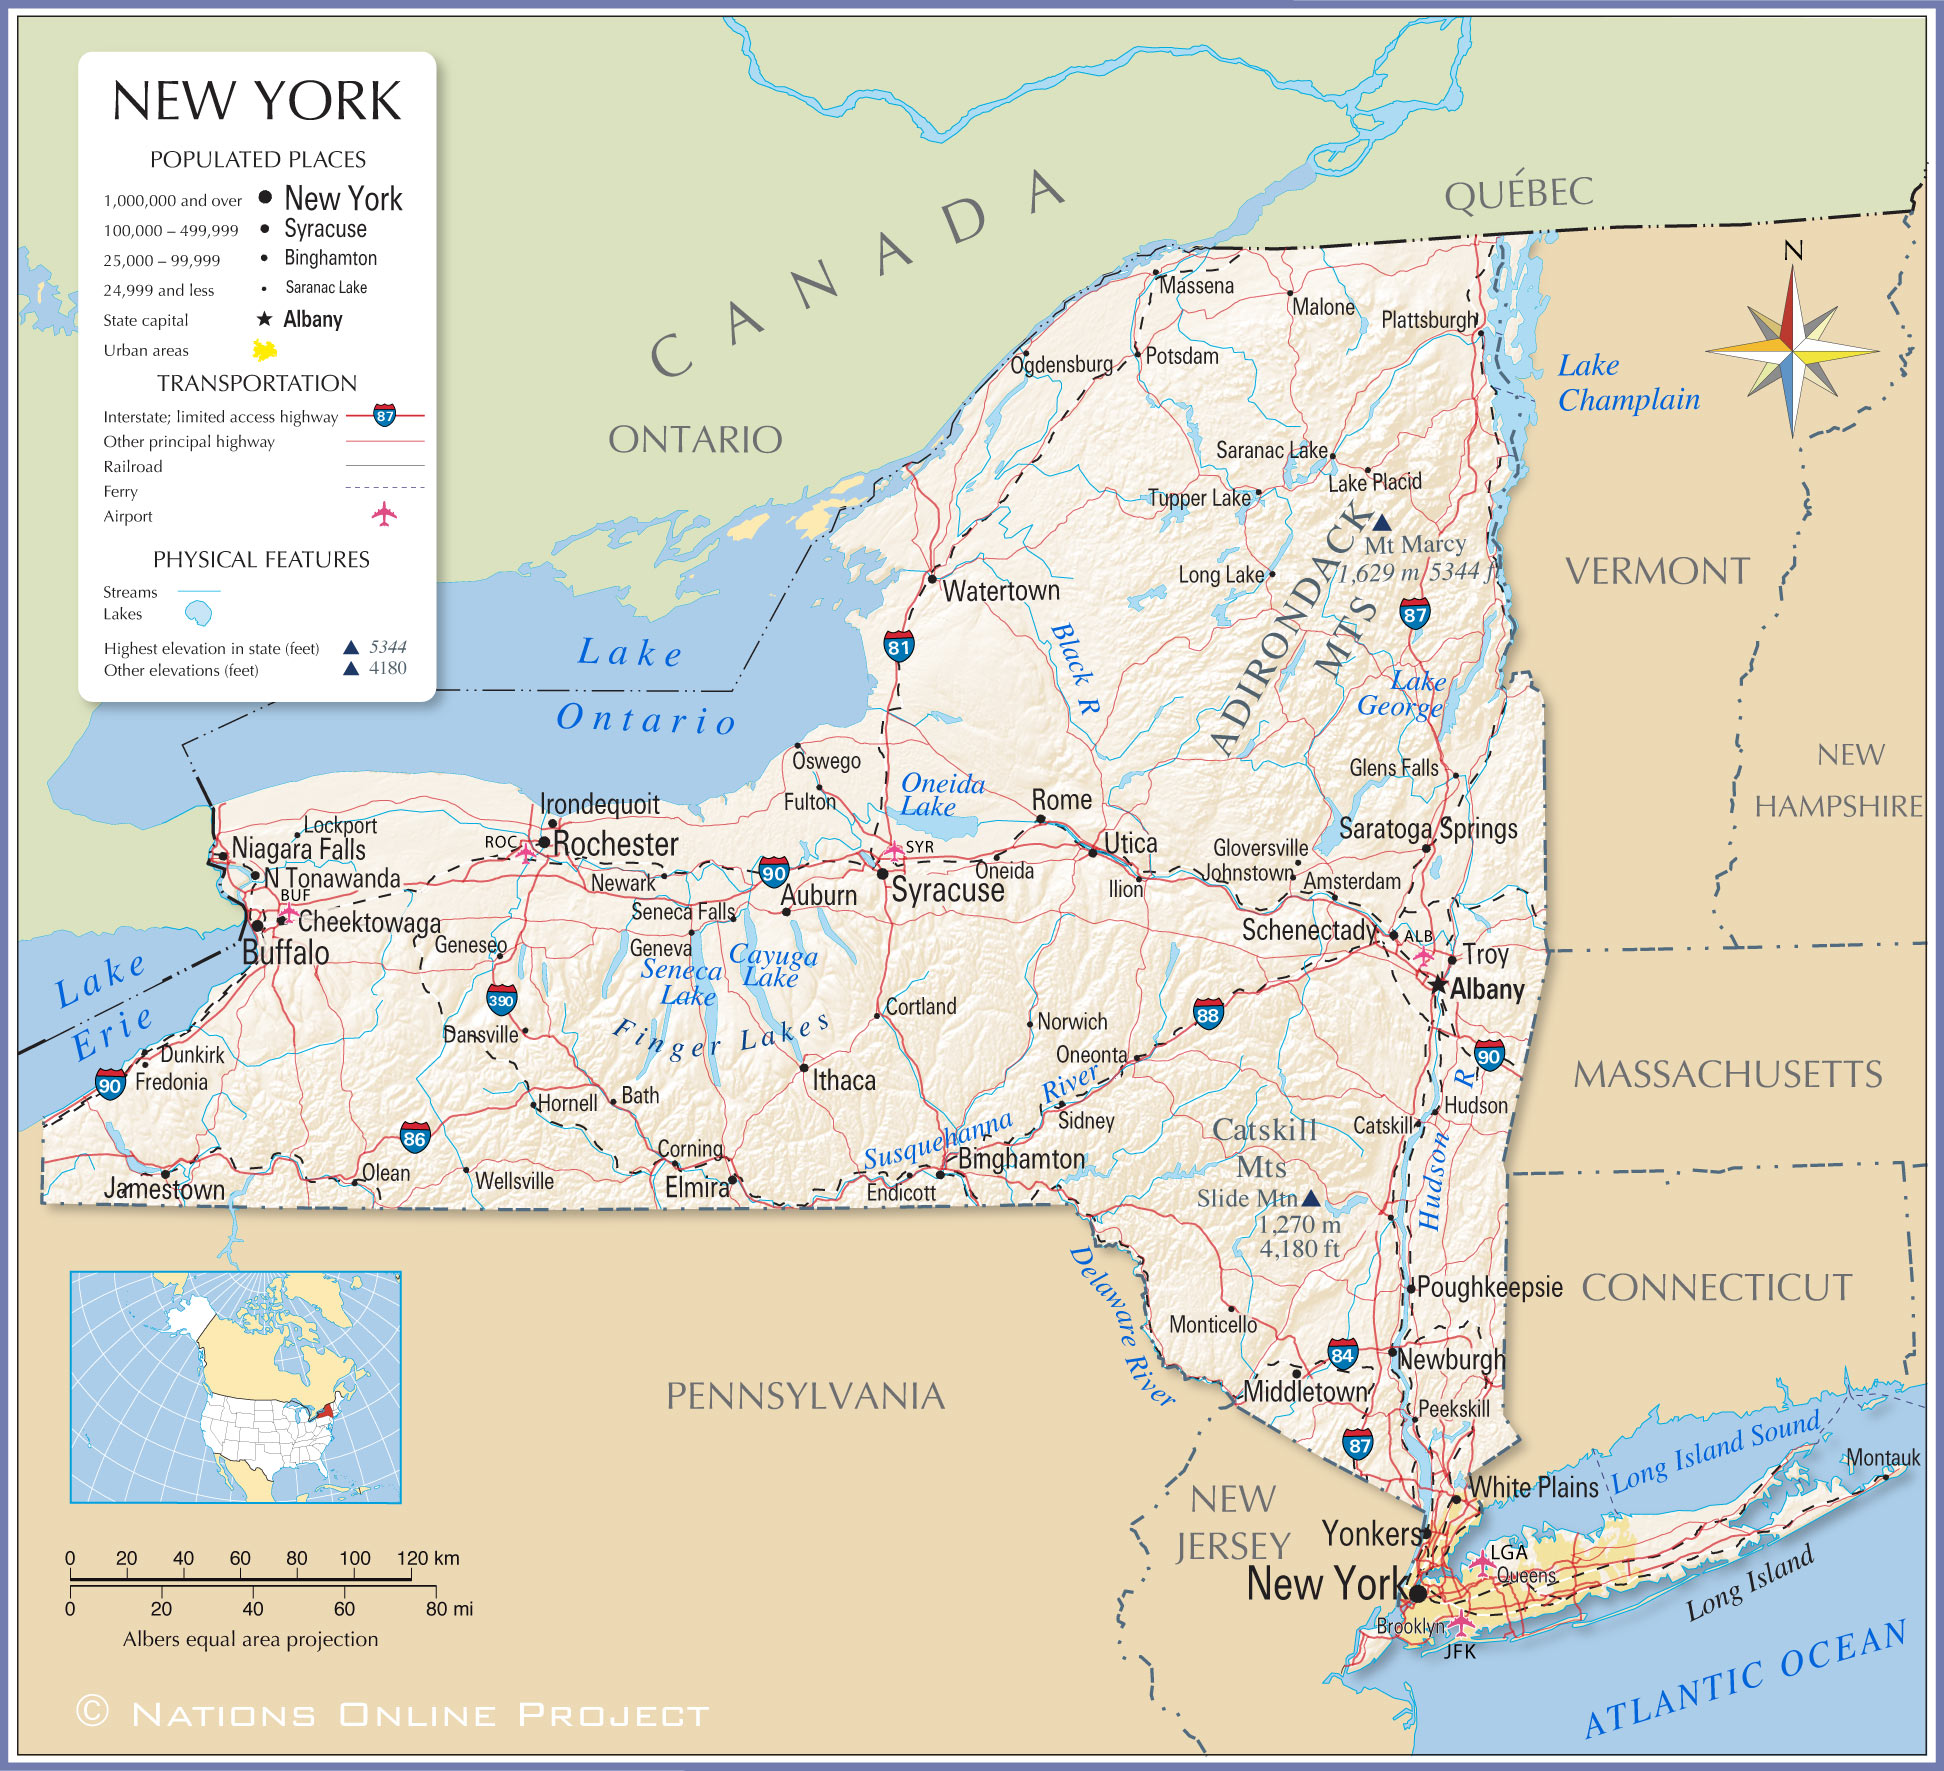 Which city in USA is close to New York?